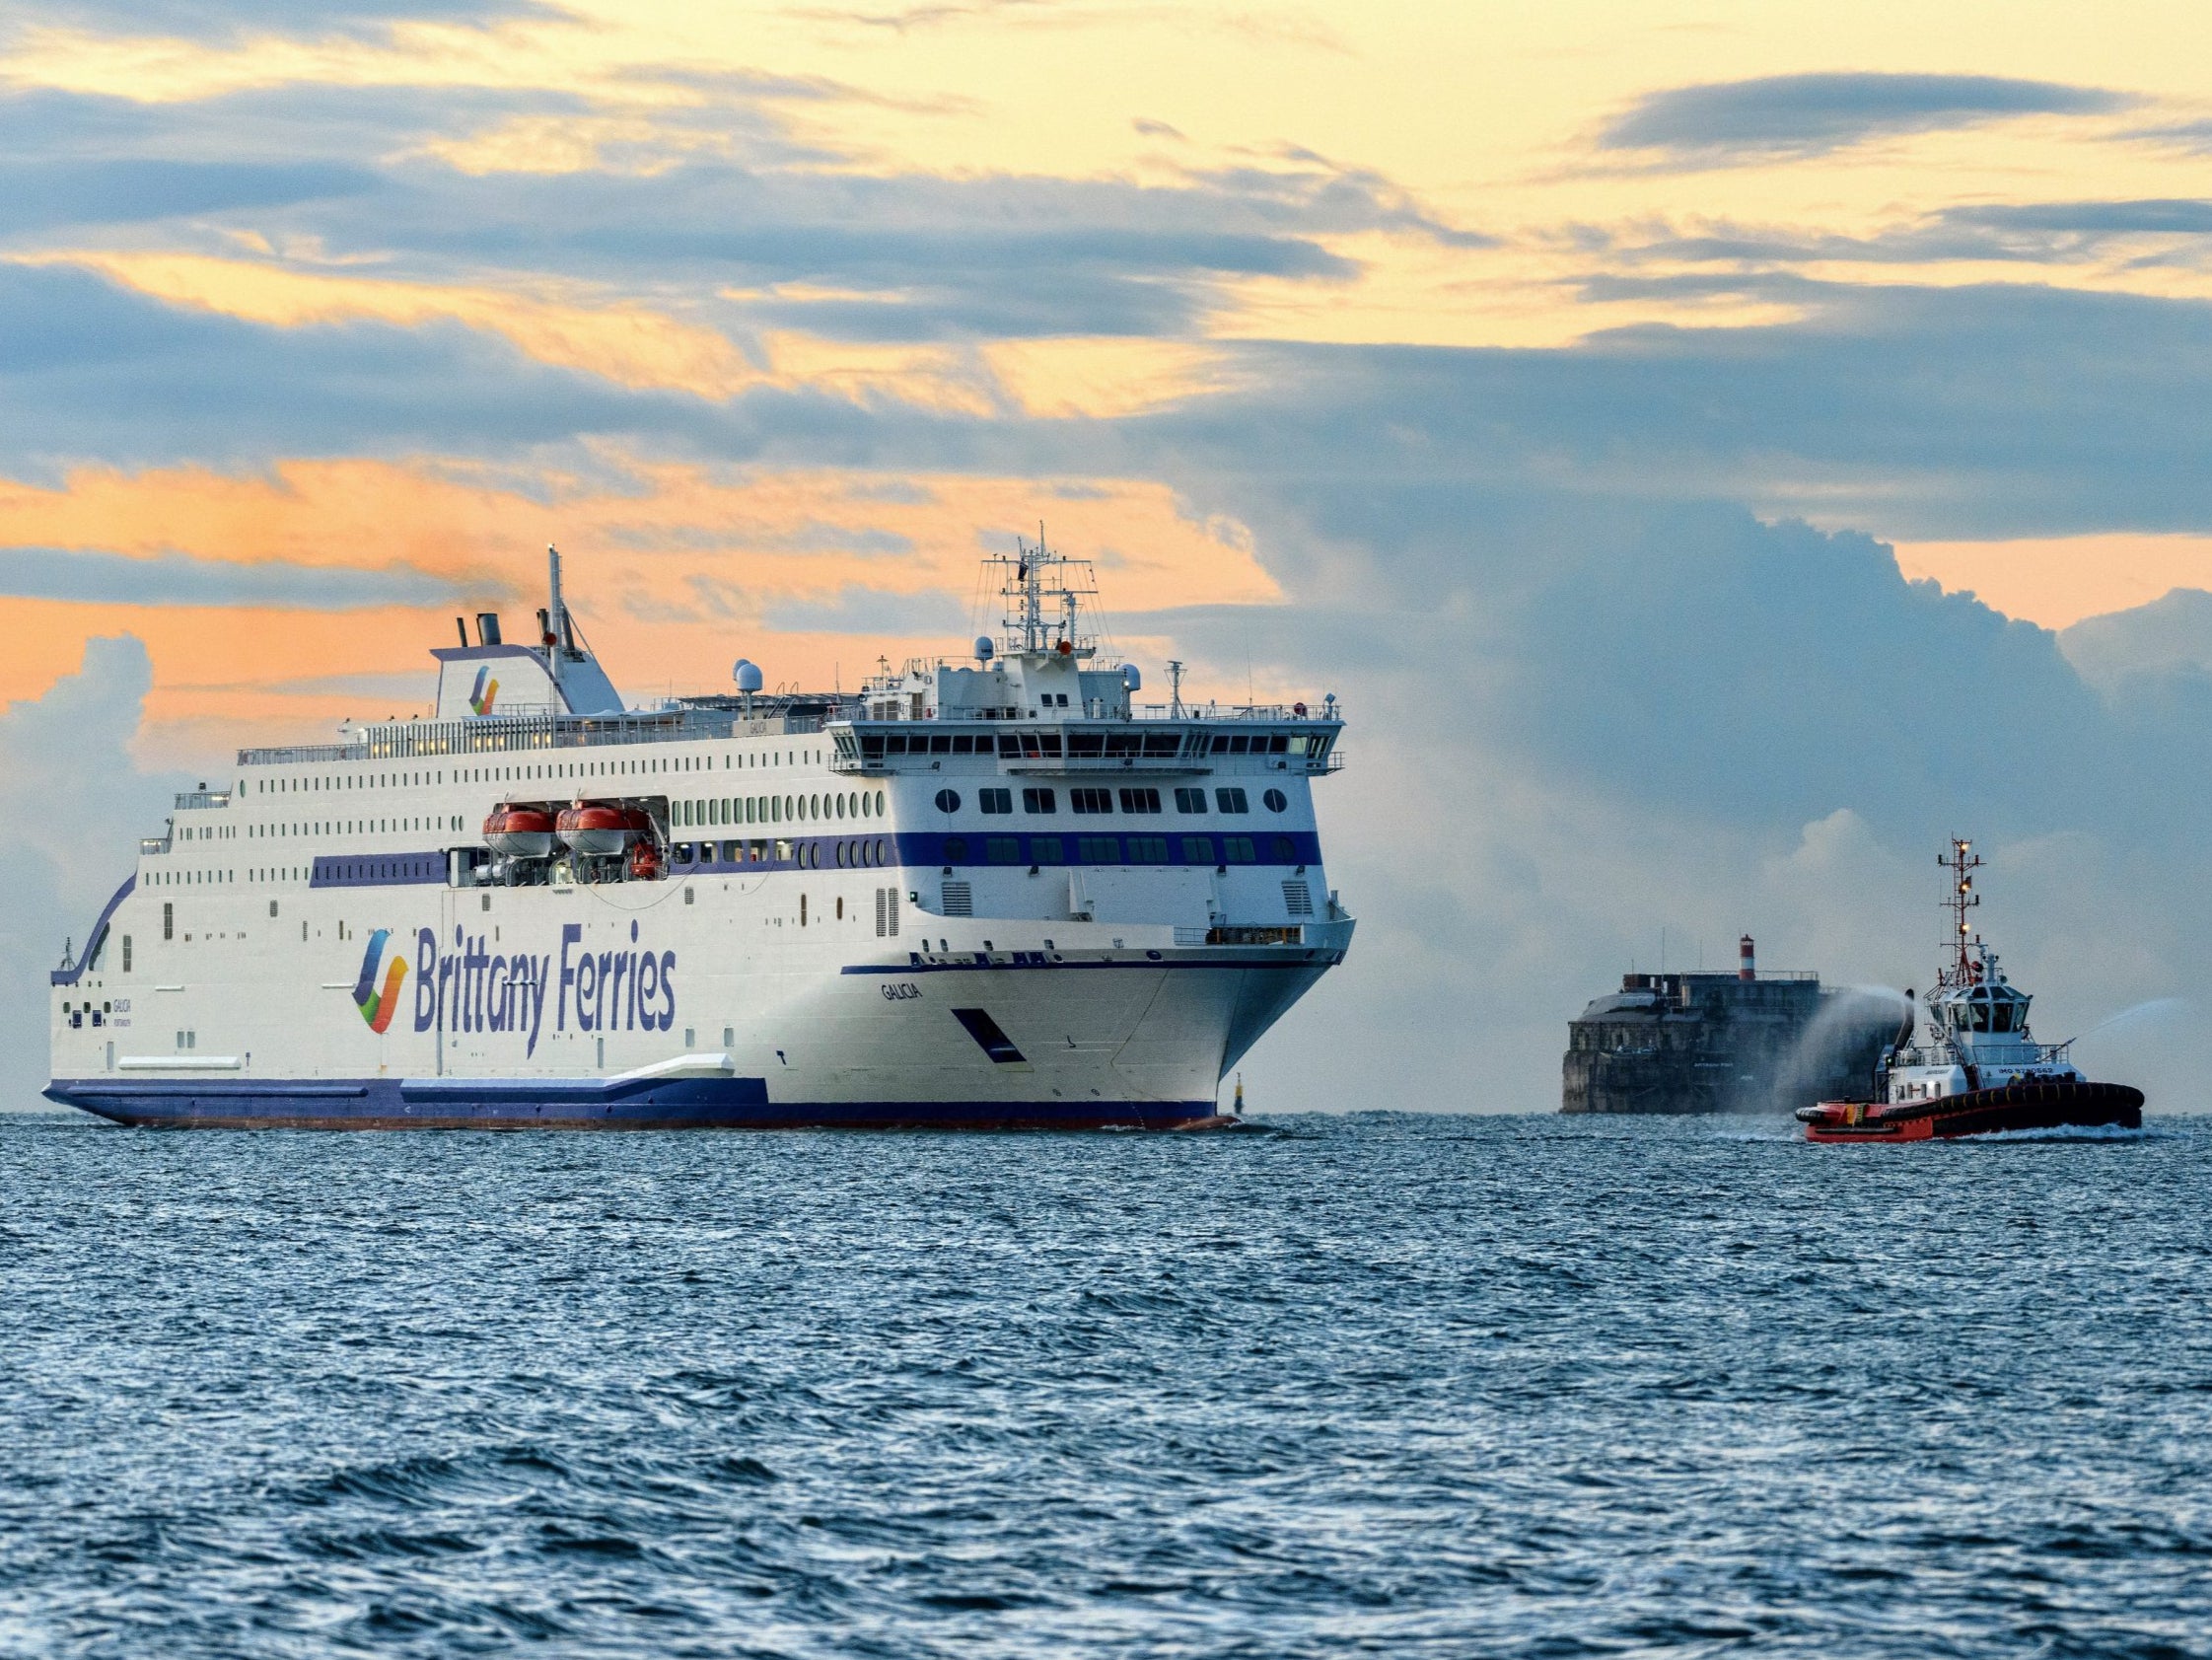 Where next? Brittany Ferries’ Galicia